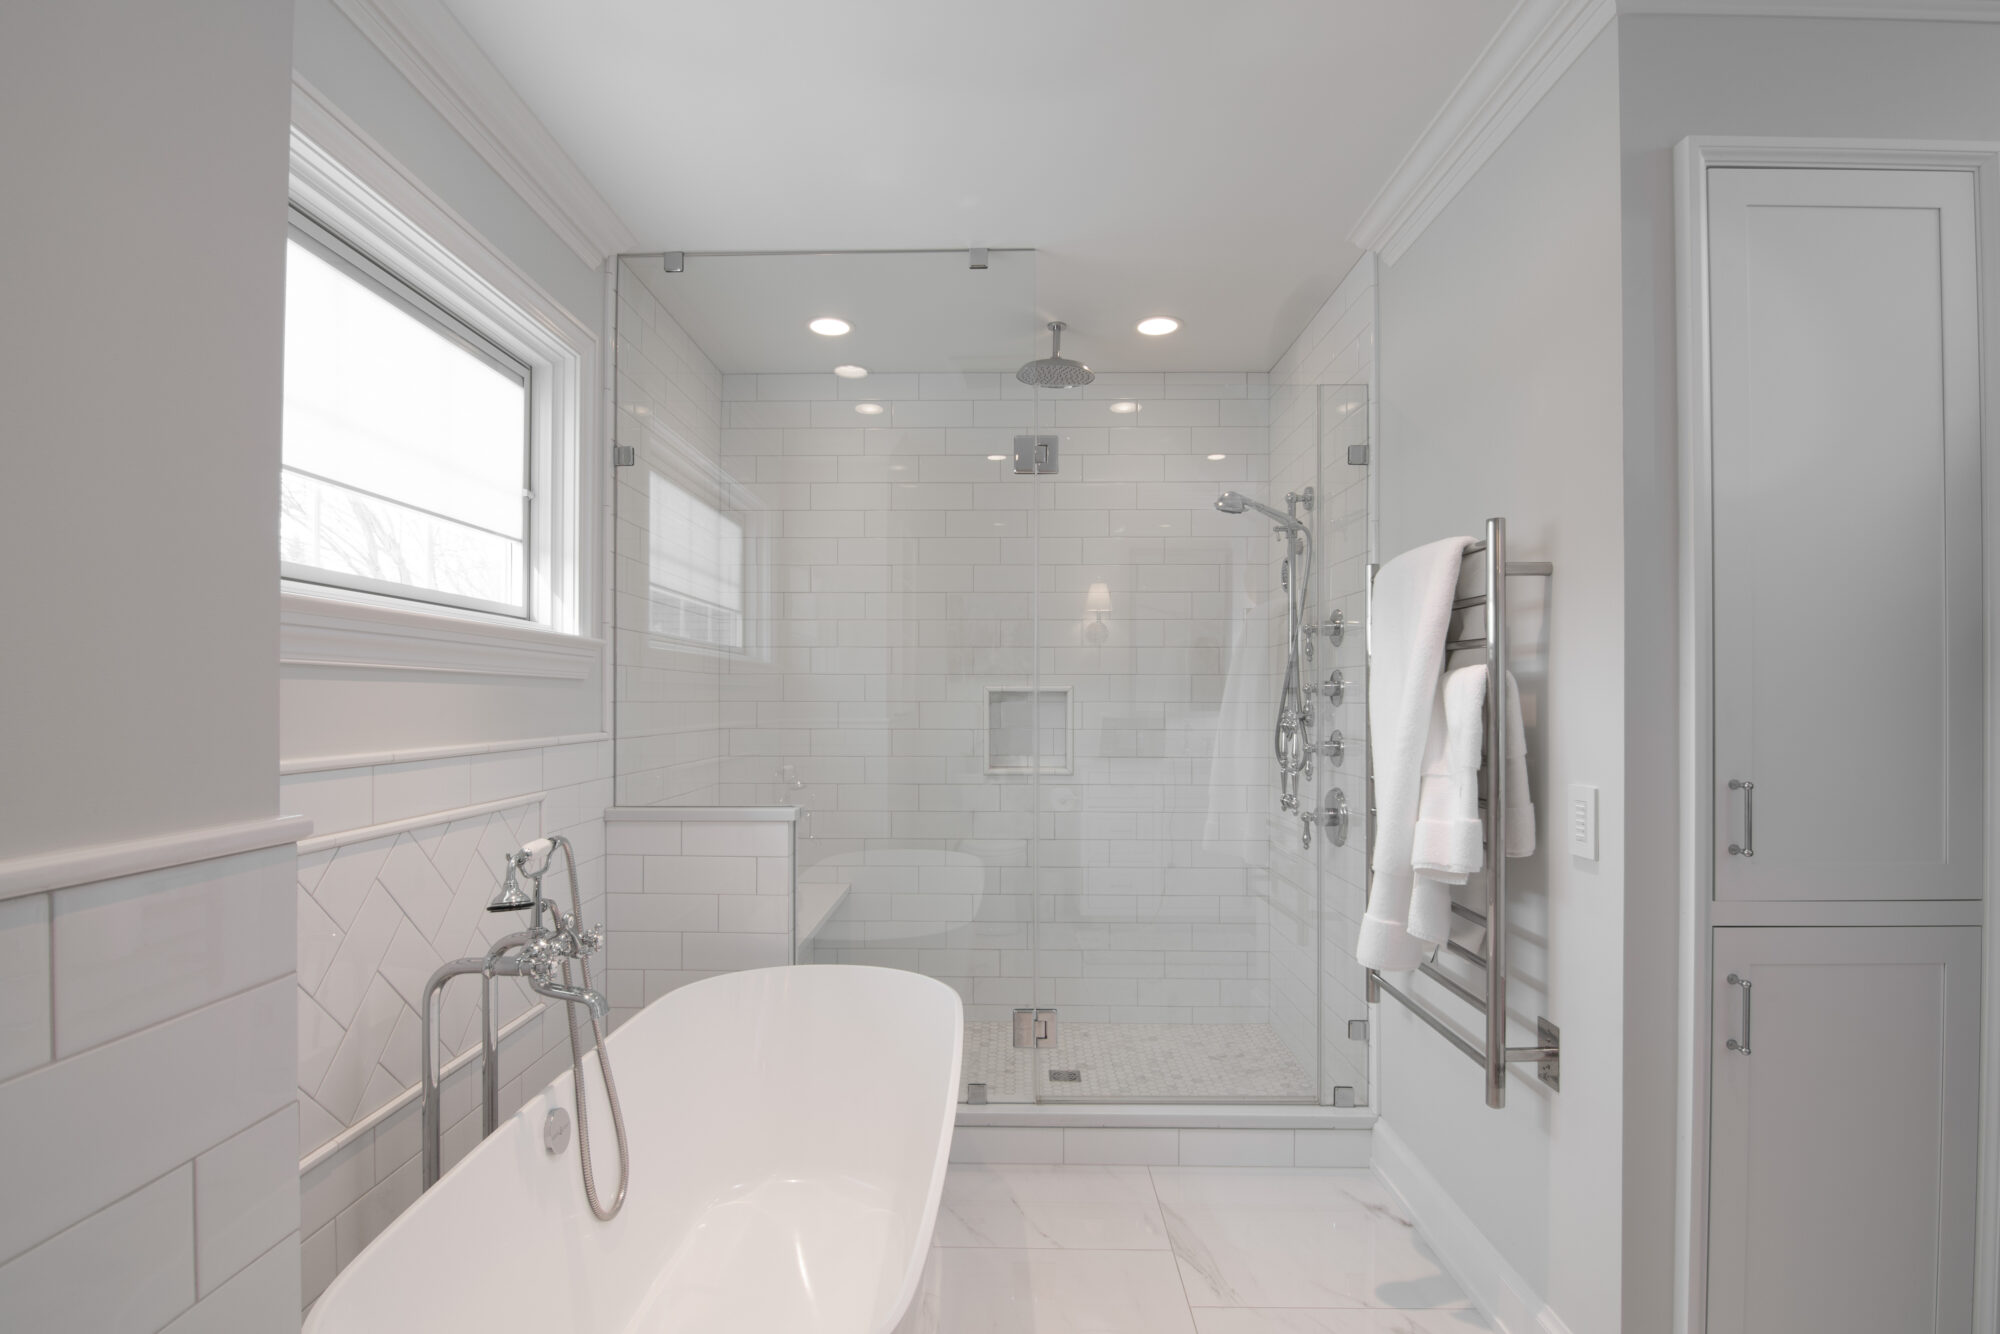 Elegant walk-in shower with an adjacent sit-in tub, both surrounded by pristine white tiling and flooring